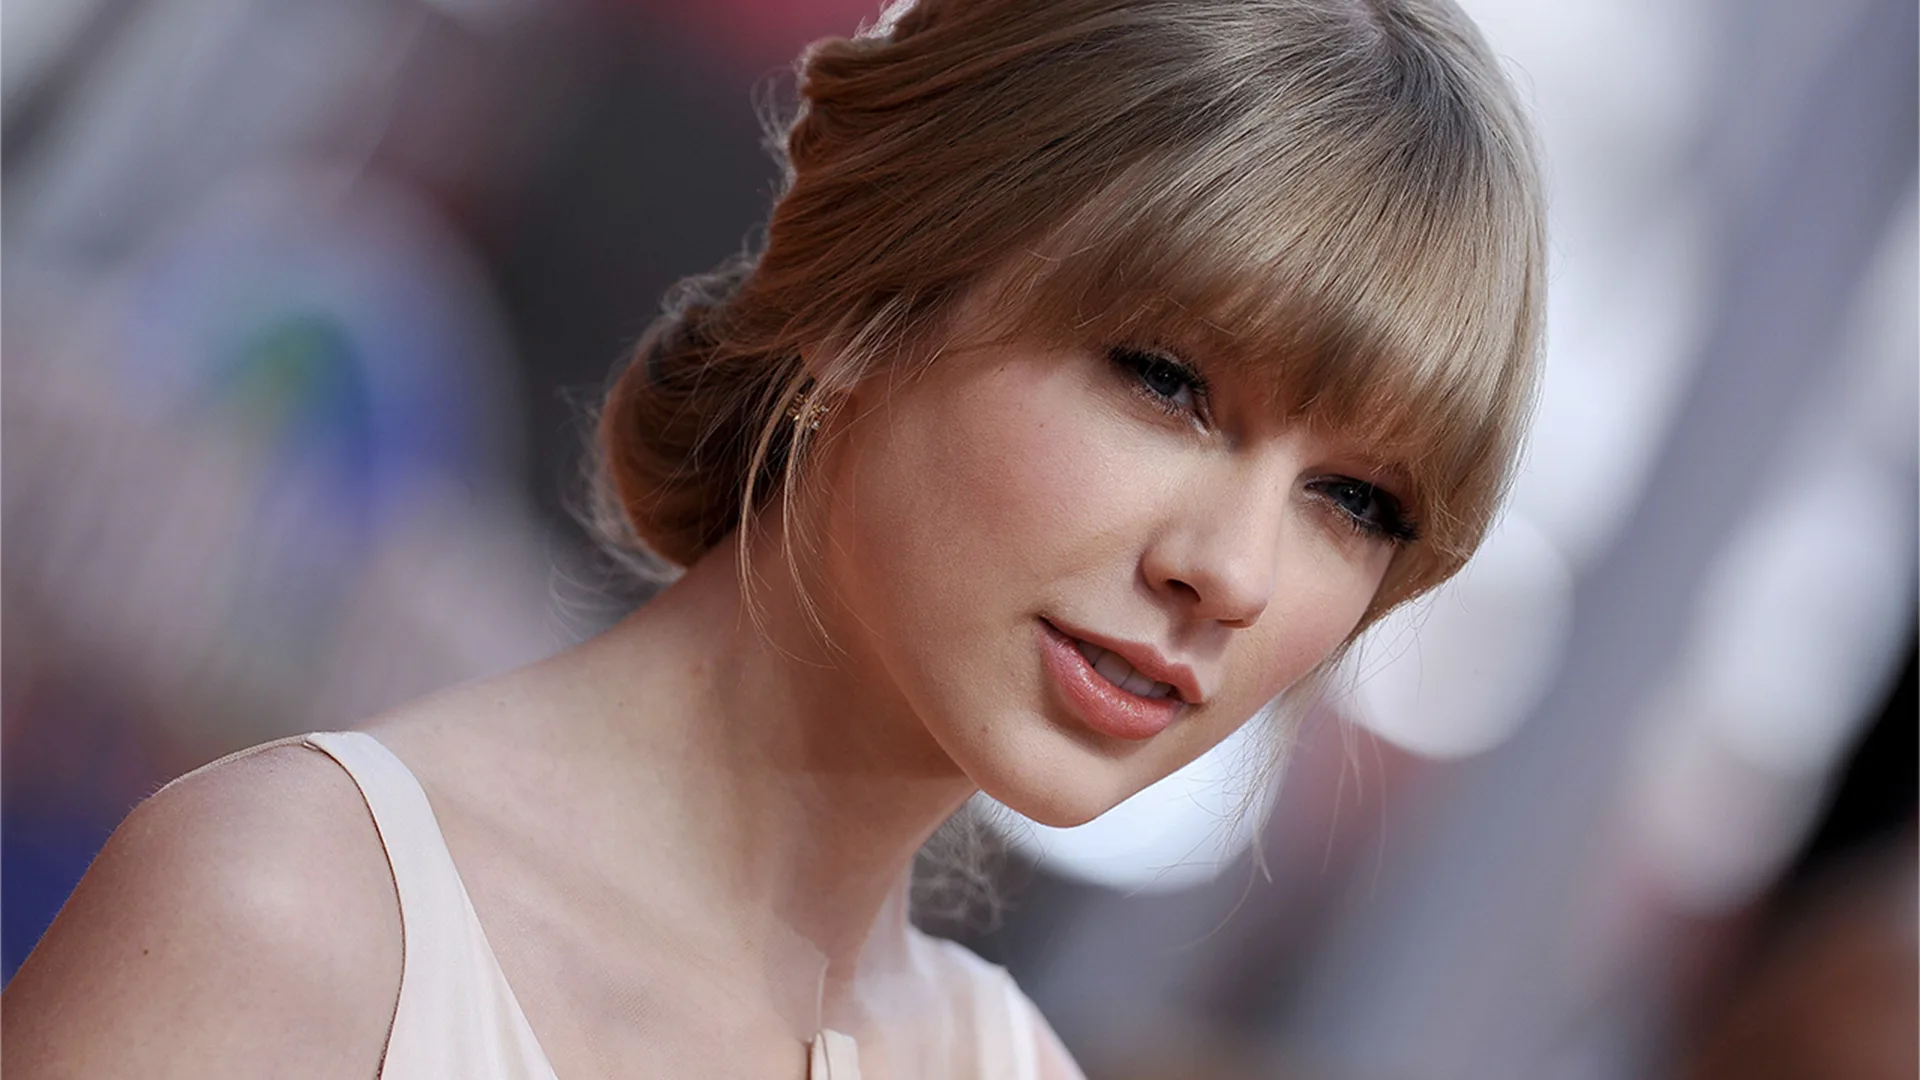 Close-up of Taylor Swift at premiere against blurred background.